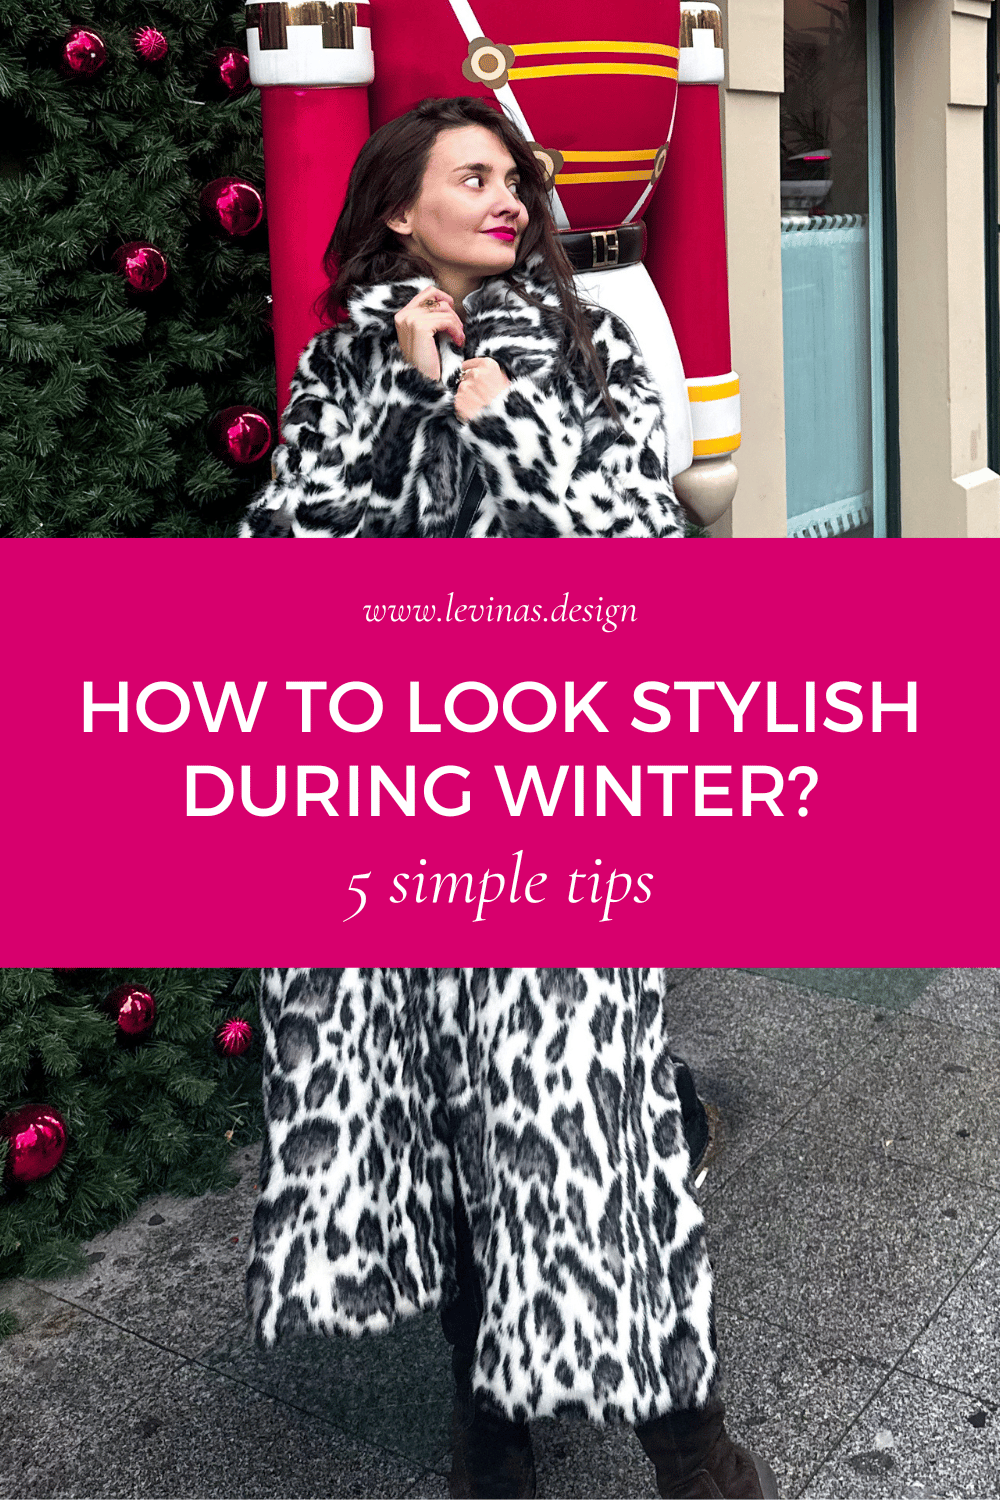 Cozy Winter Outfits: Stay Warm in Style!